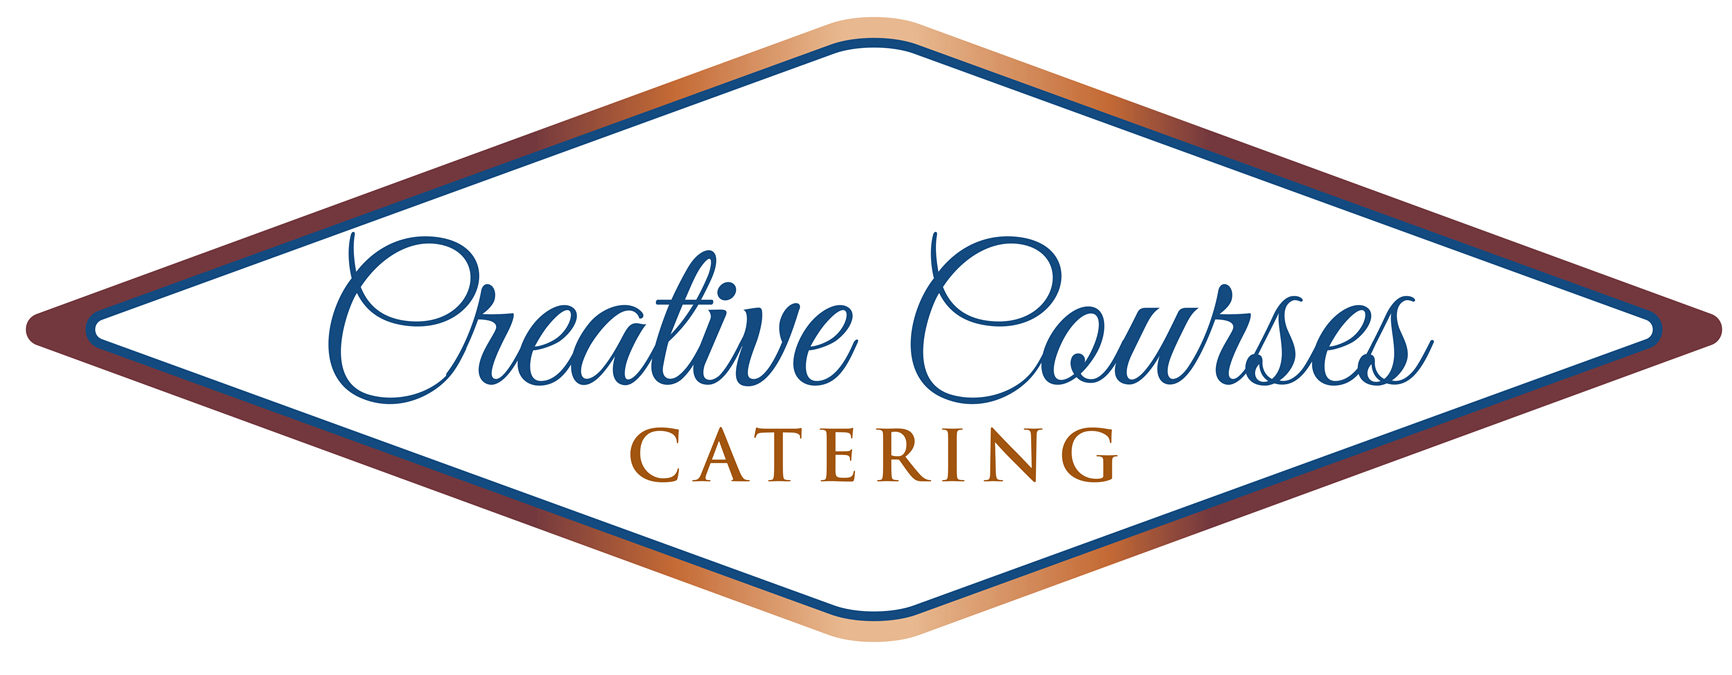 Creative Courses Catering